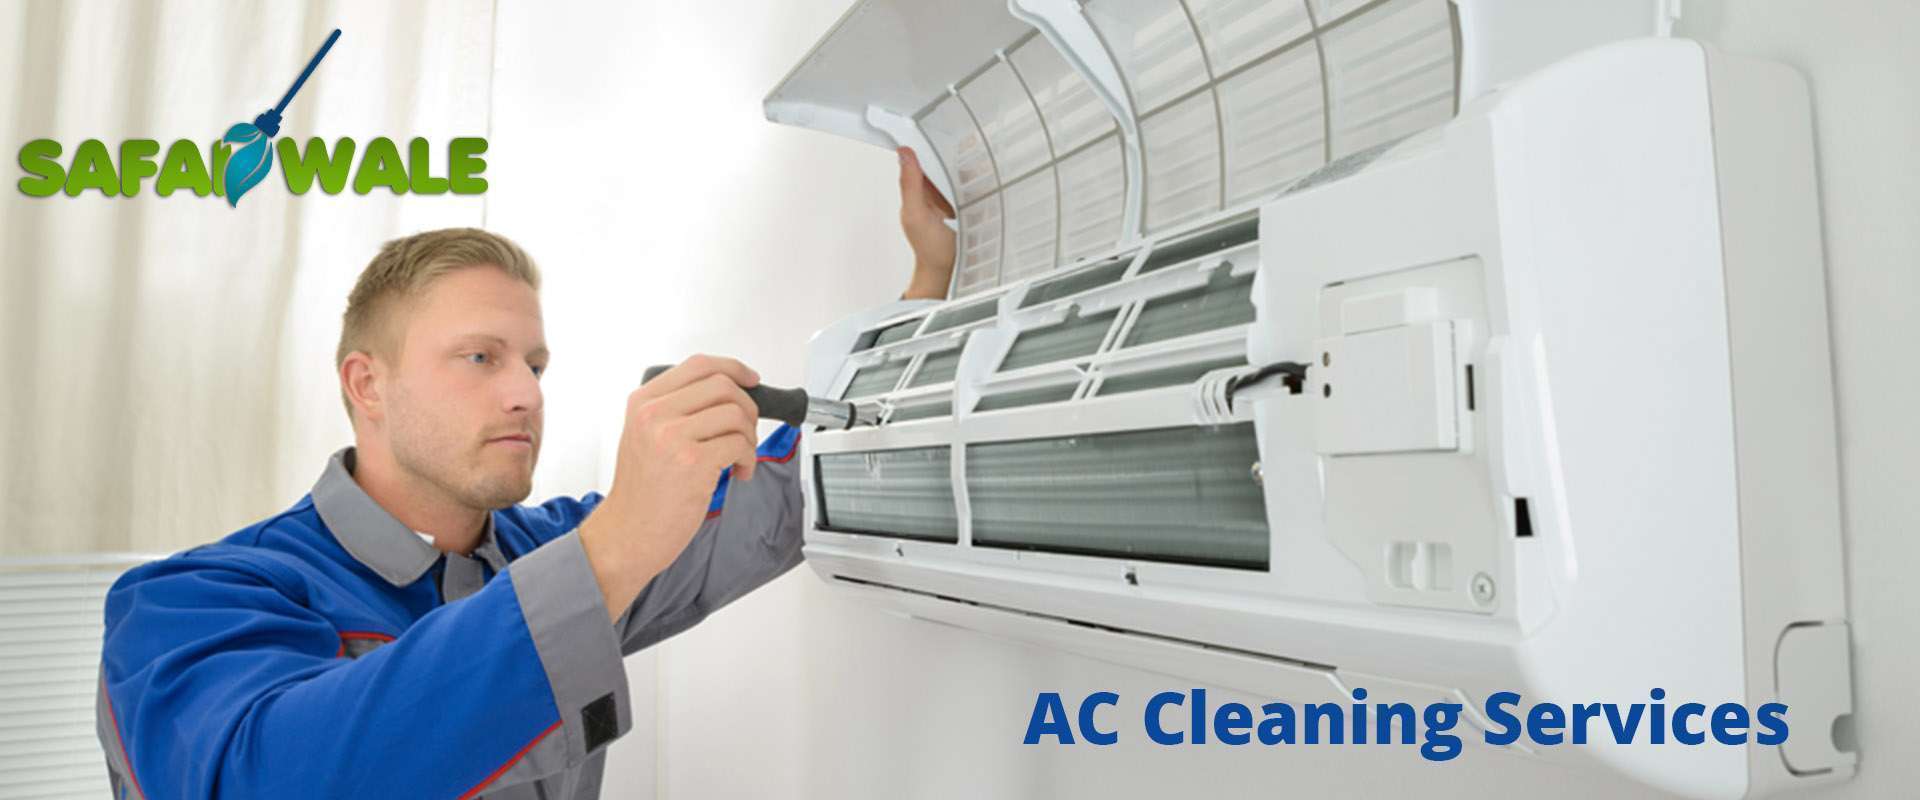 ac cleaning services in Bangalore